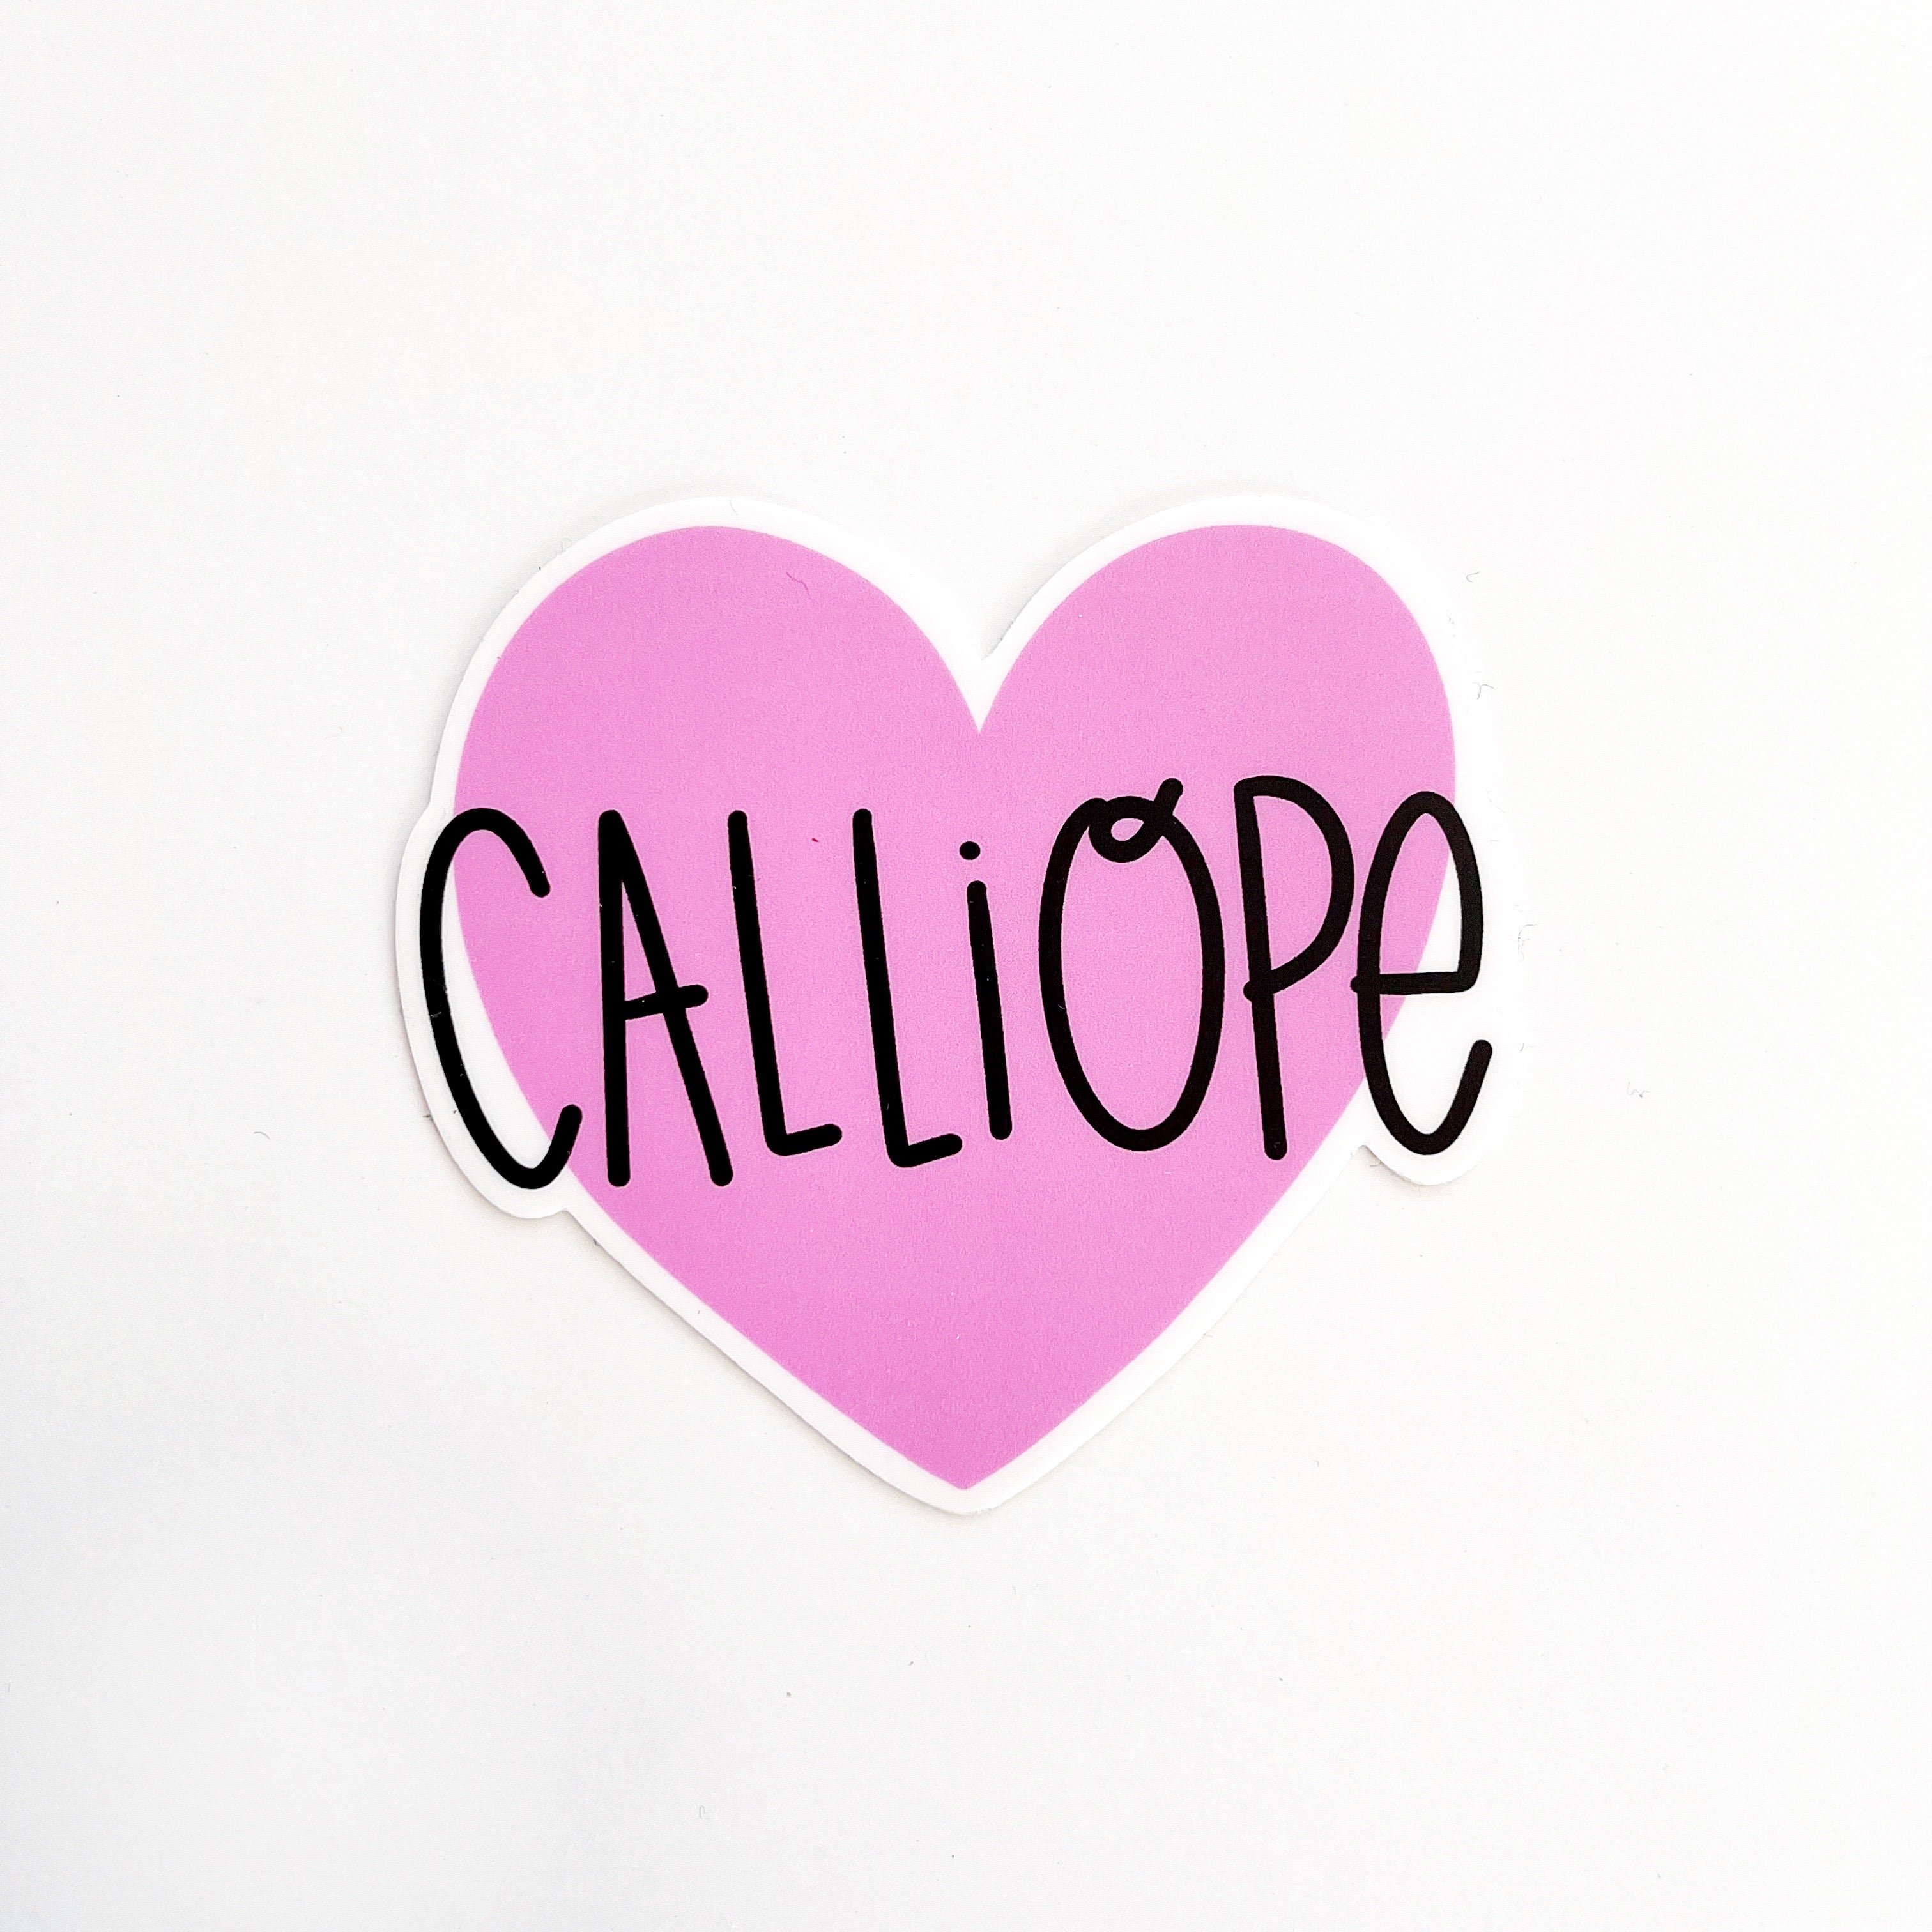 Image of sticker with pink heart with black text says, "Calliope". 